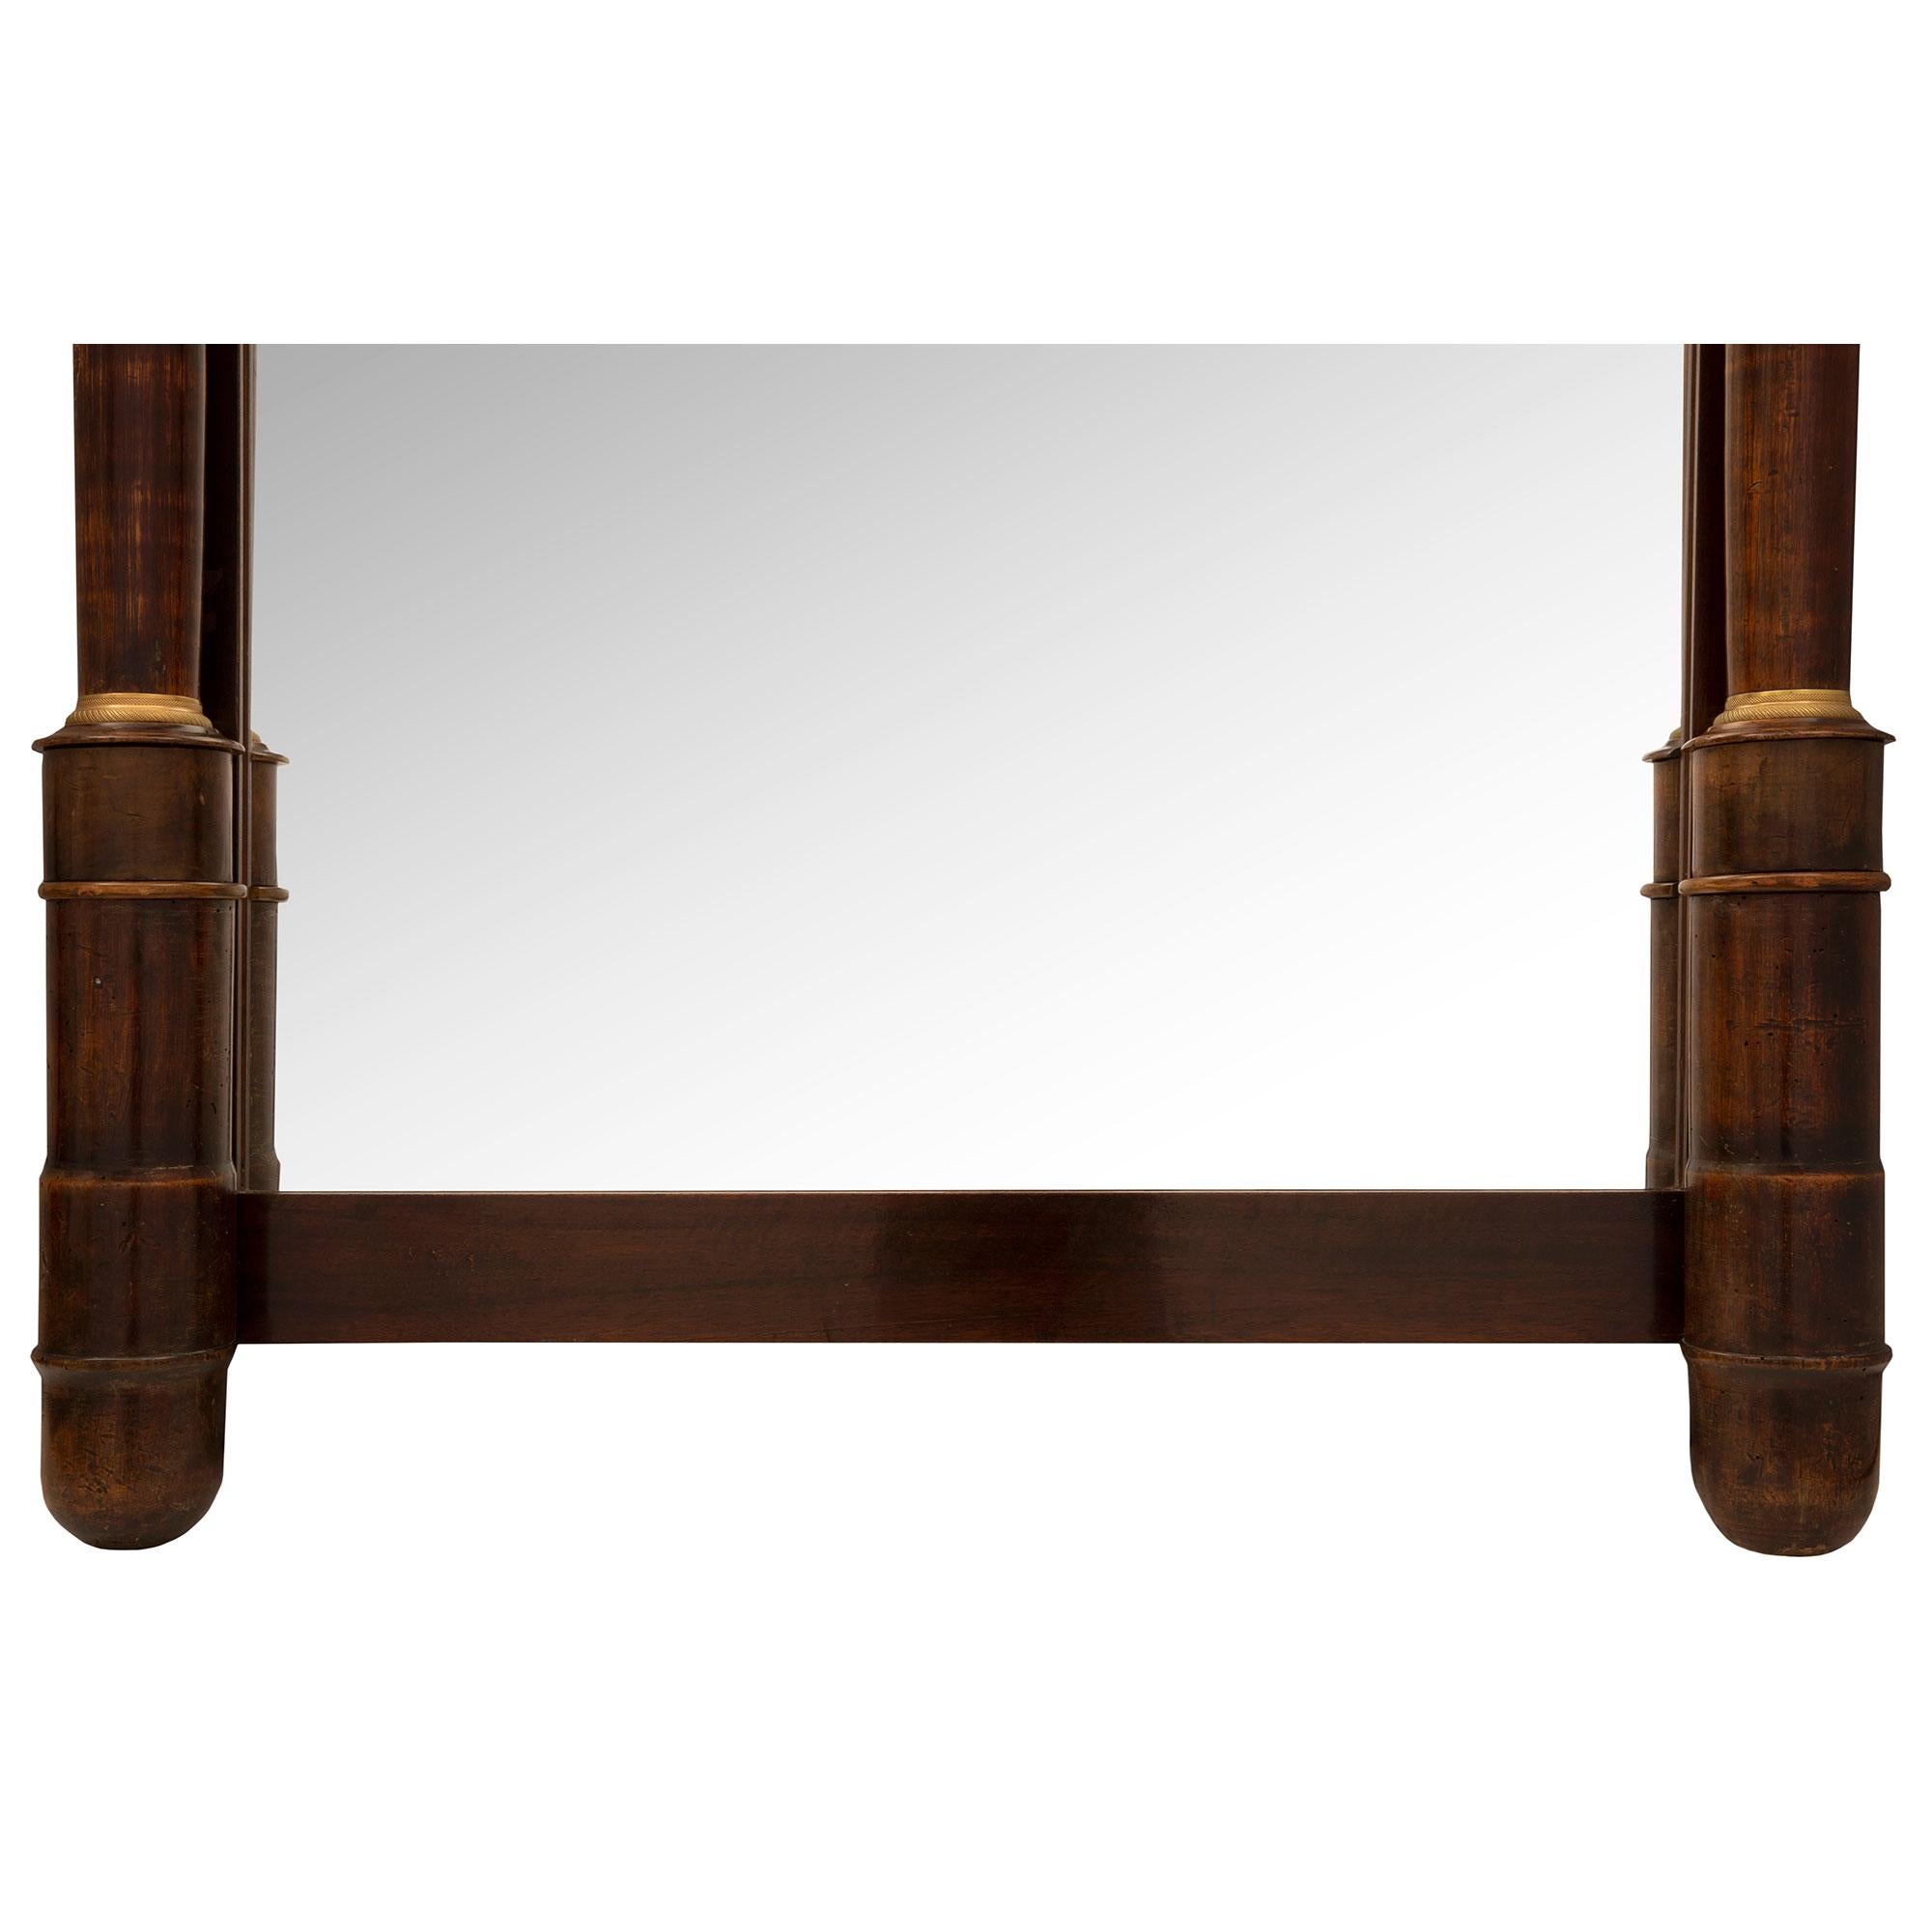  French 19th Century Empire Style Mahogany and Ormolu Mirror For Sale 3